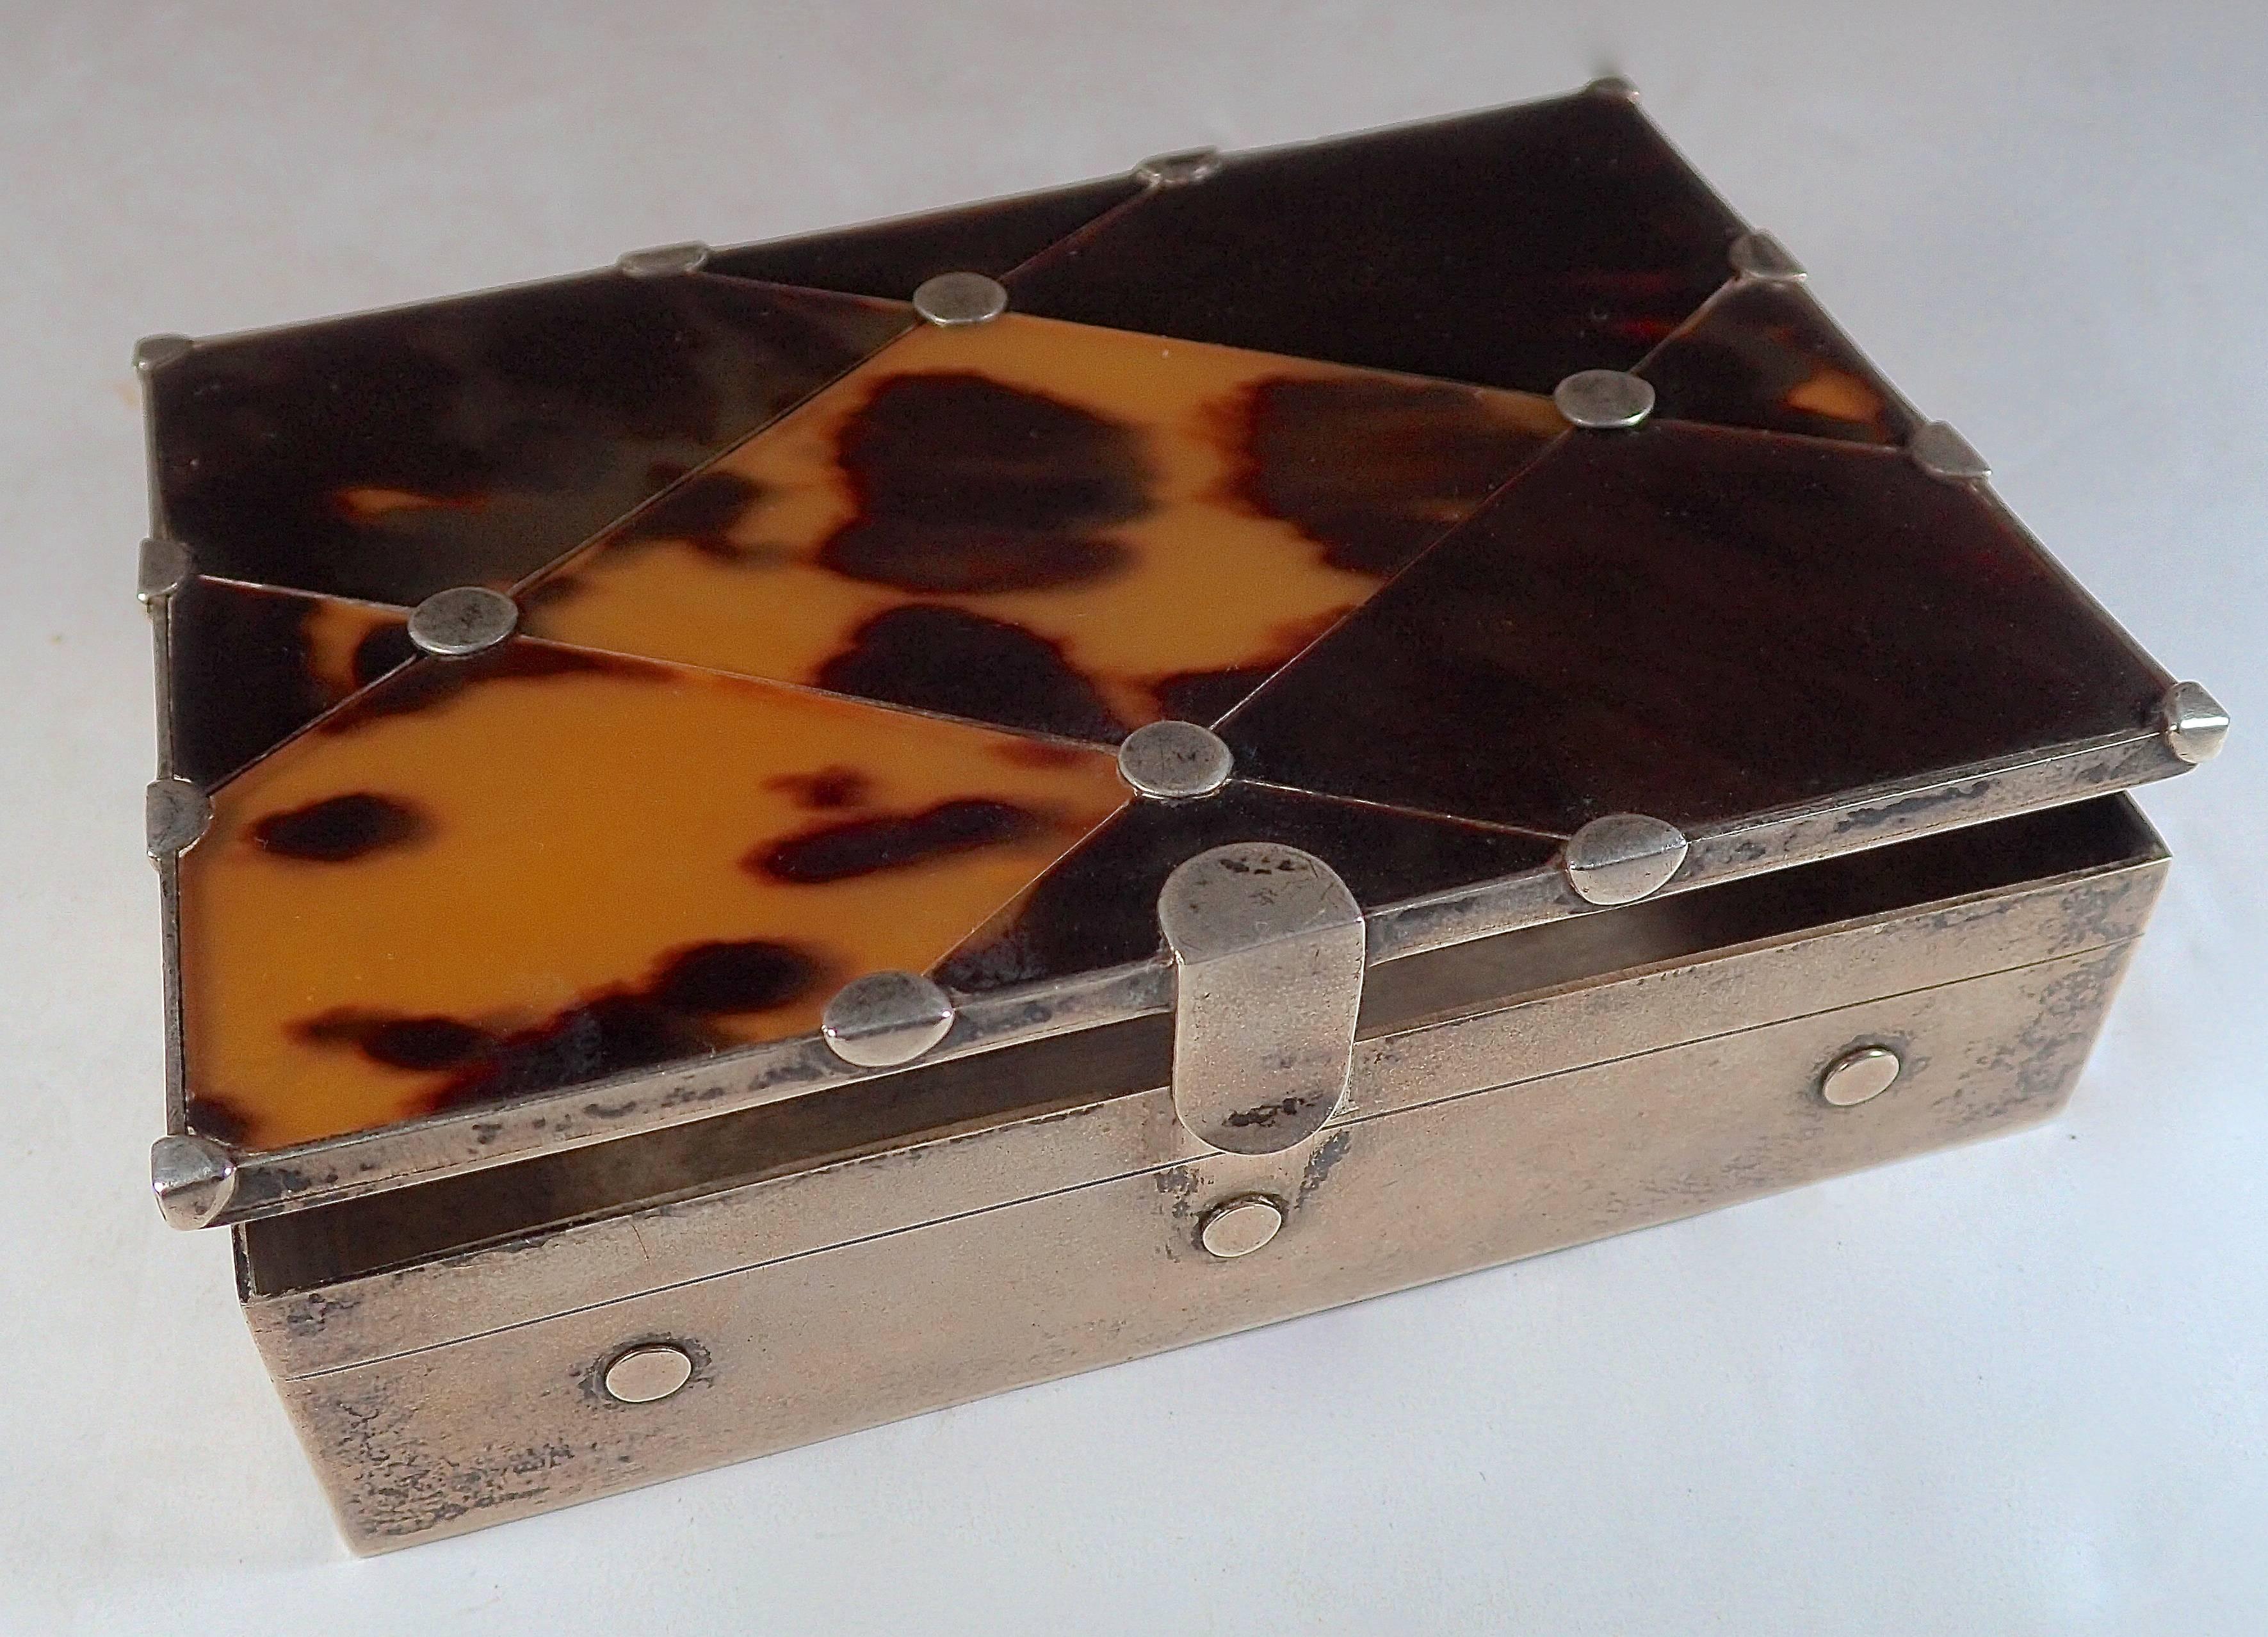 Sterling silver dots set the diamond cut tortoise shell that create the lid. Both boxes feature a tension clasp in the front and hinged opening (pictured). Silver mark Eagle with 30. 

Second box dimensions:
Width: 3.44 inches.
Height: 1.13